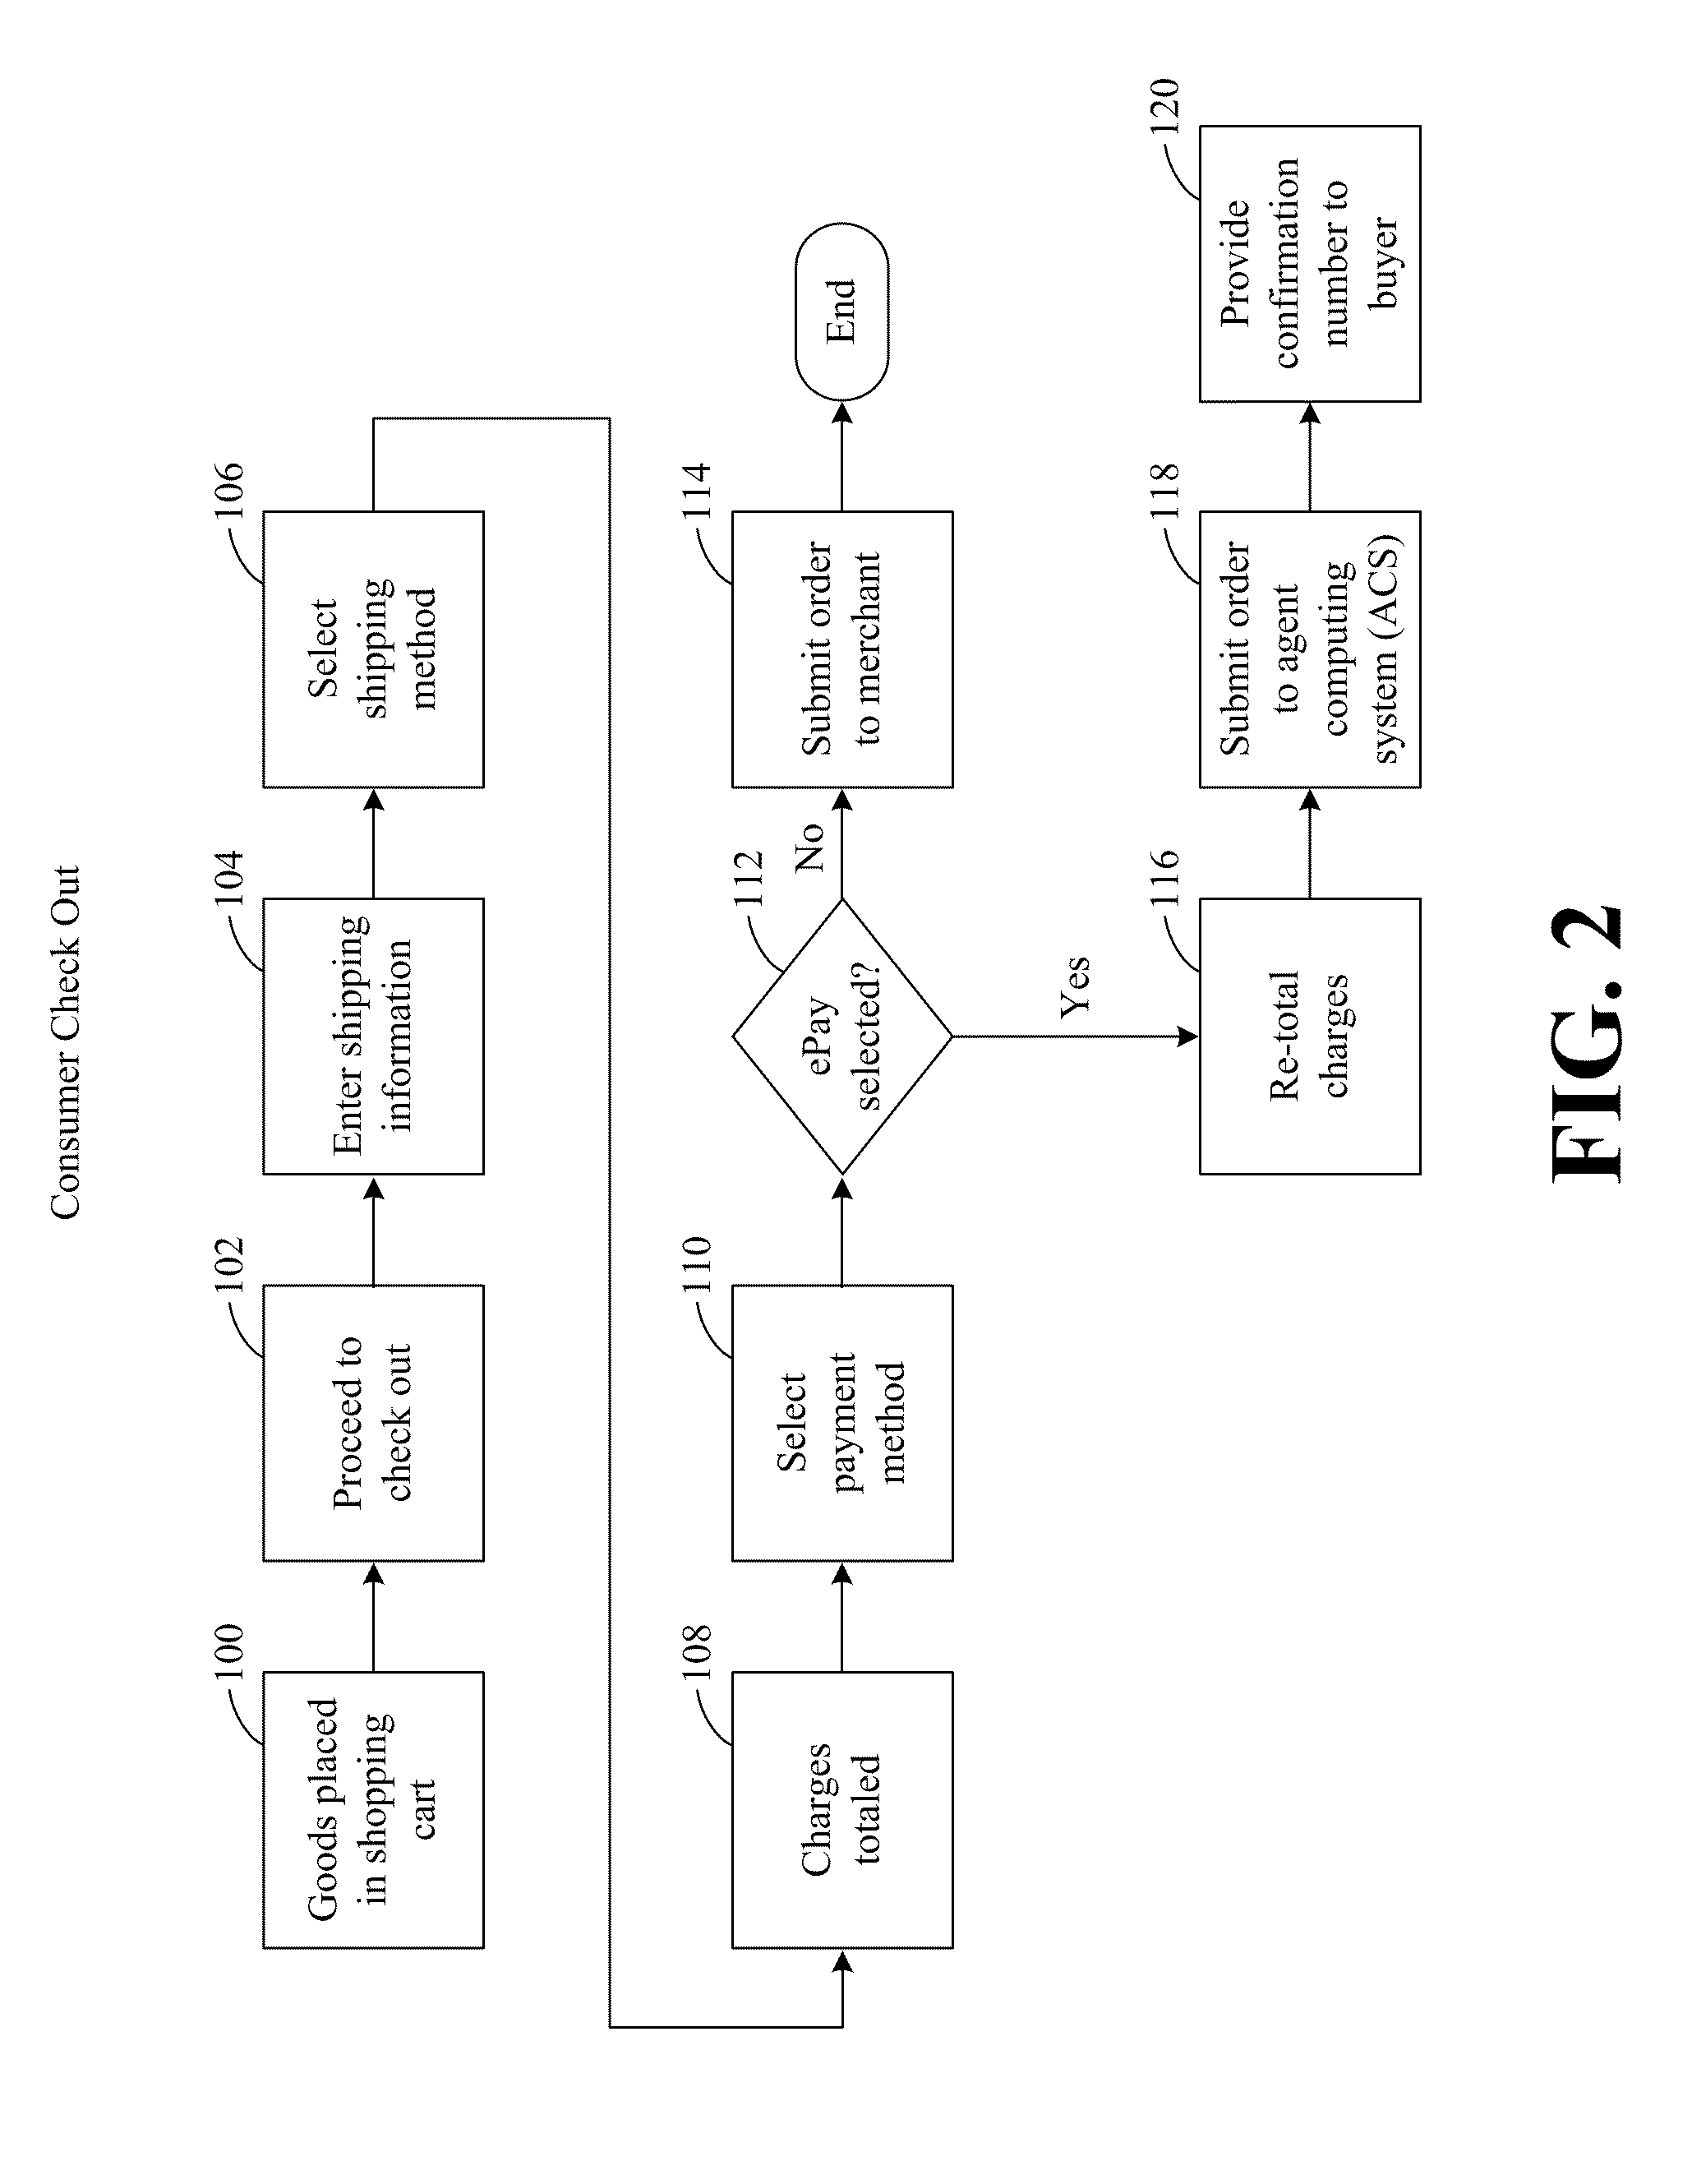 Method for Facilitating Payment of a Computerized Transaction